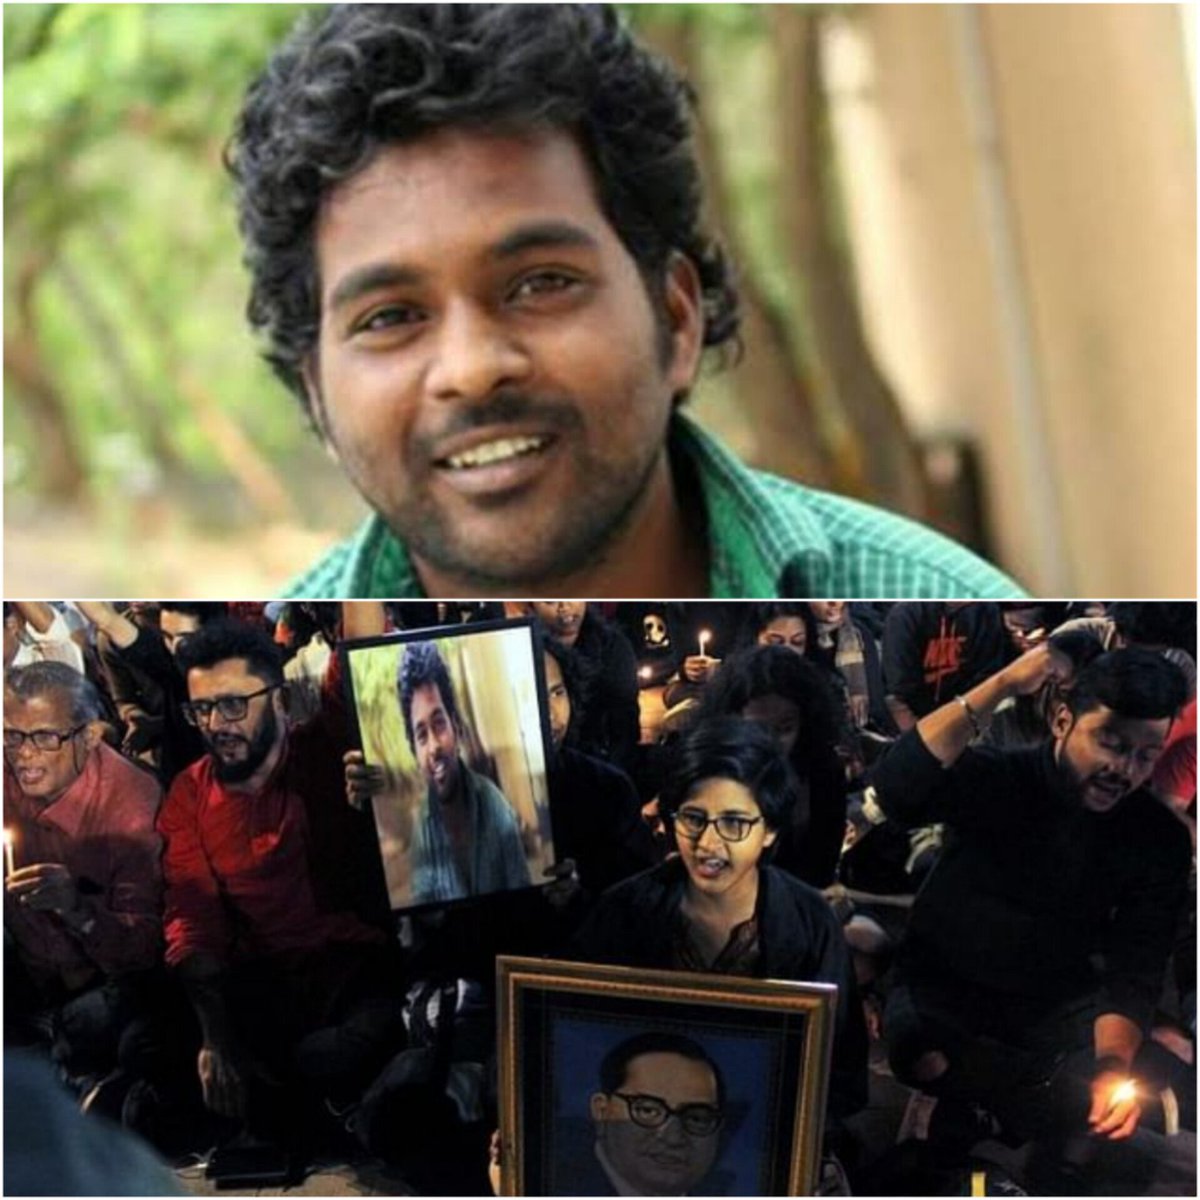 #RohithVemula case was full of red flags from day 1

1 He was engaged in defending Islamic terrorists. Did 'upper caste' people force him to support Islamic terrorism?

2 No interest in studies, only politics

3 Used to physically attack political opponents

4 His sister is…